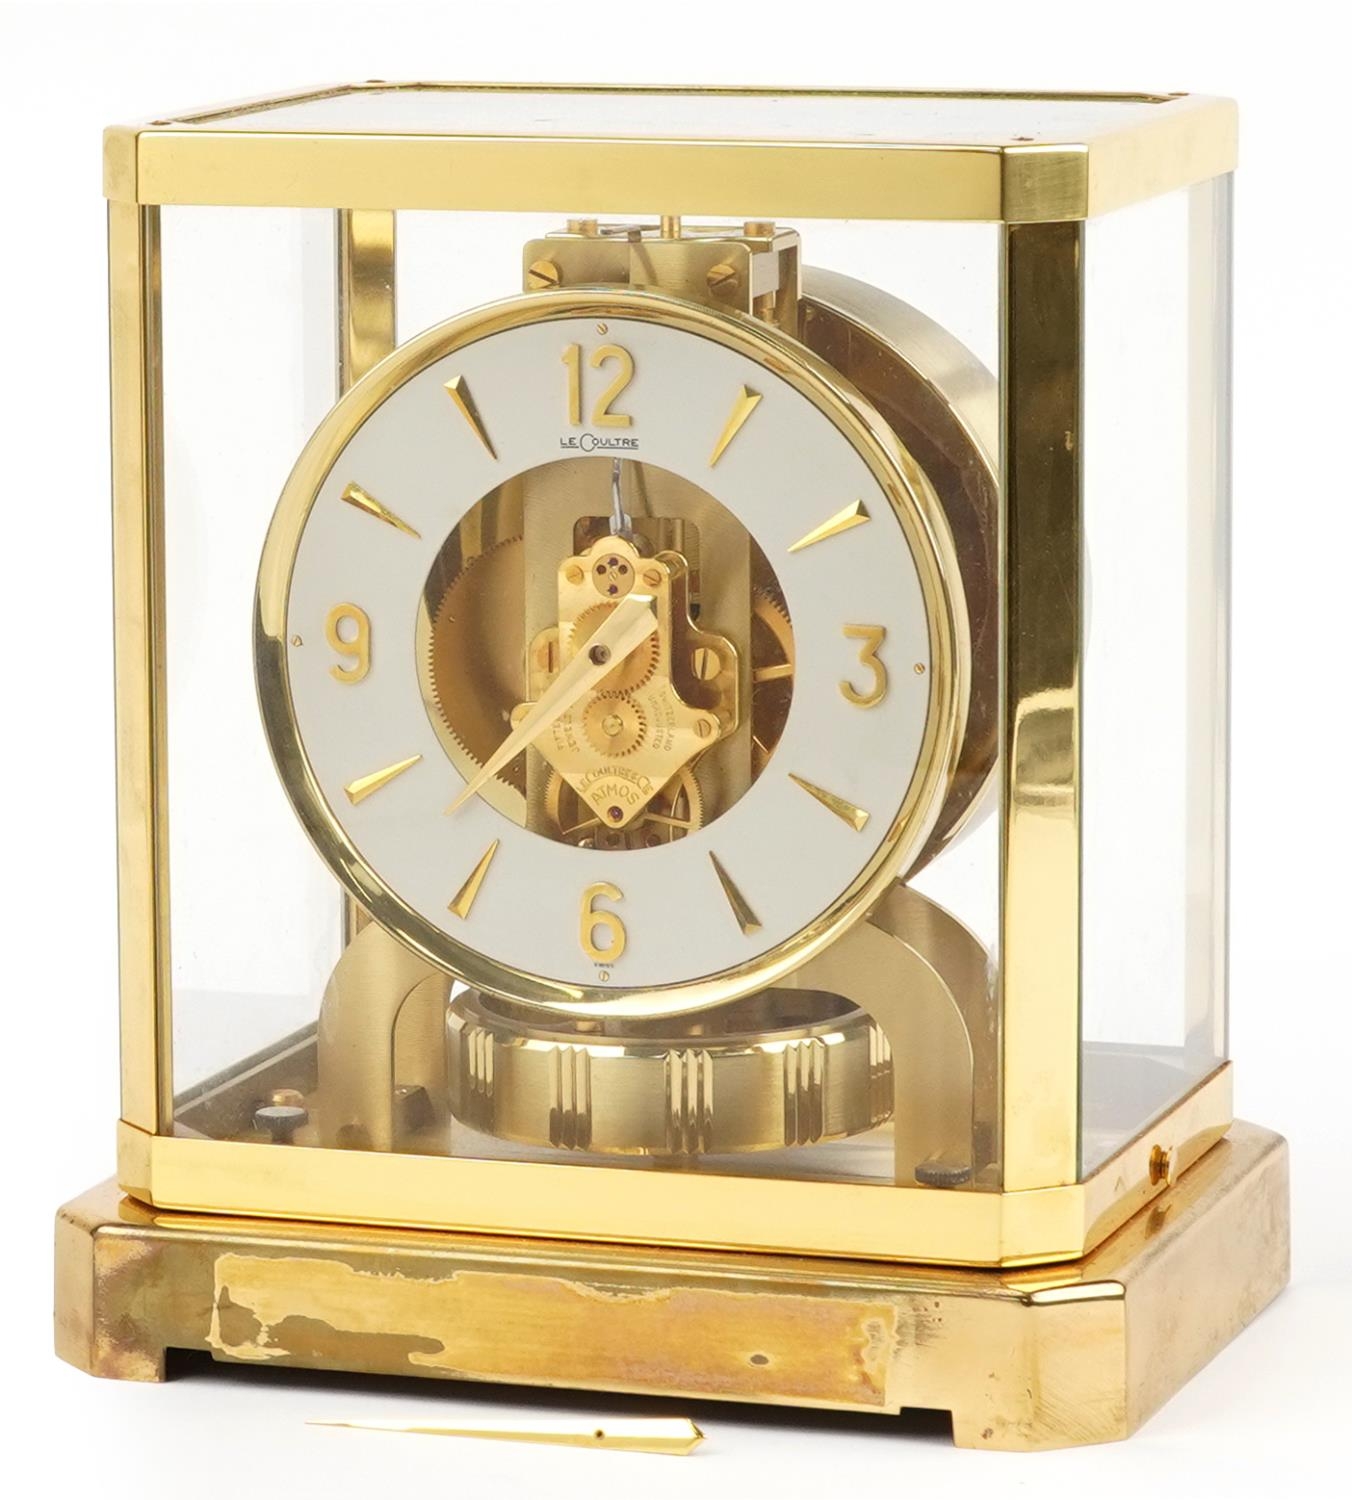 Jaeger LeCoultre brass cased Atmos clock with circular chapter ring having Arabic numerals, serial